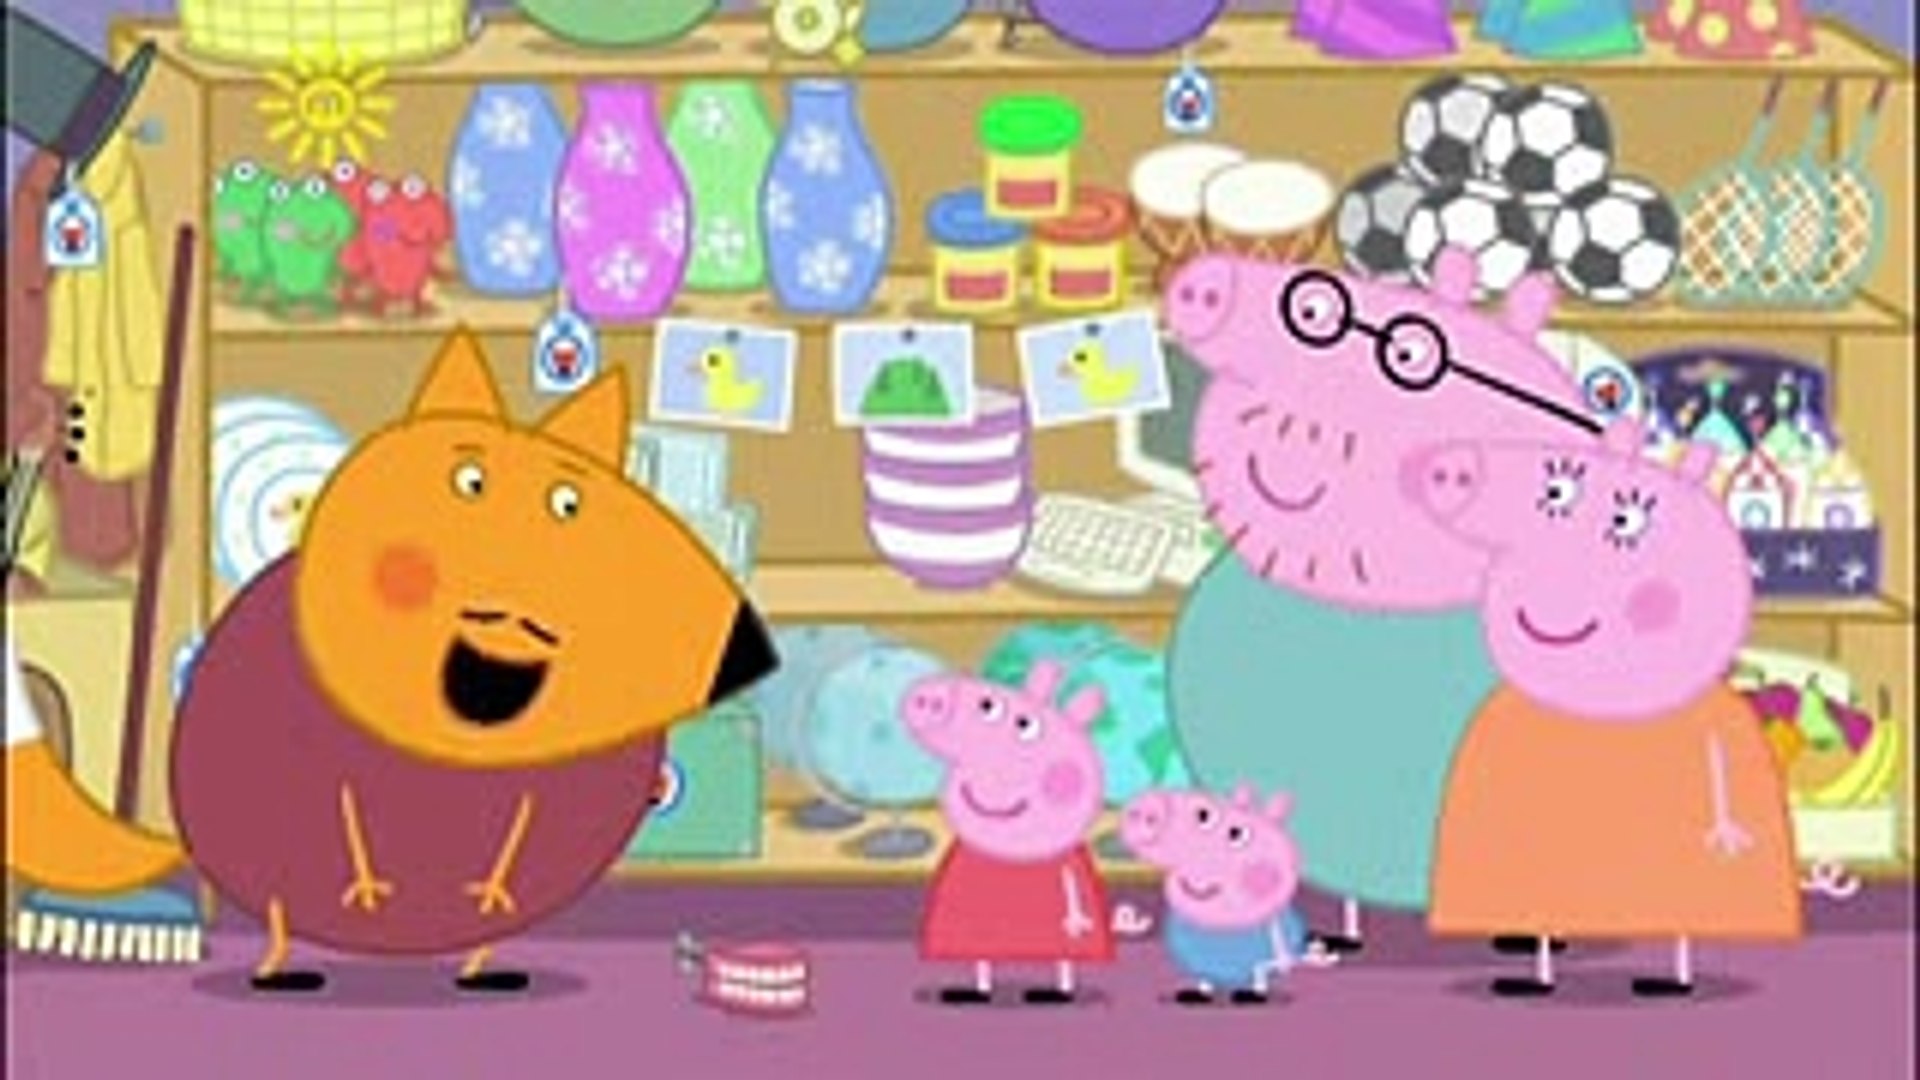 Peppa Pig English Full Episodes Pepper Pig NEW 2016 - Peppa Pig english  episodes full episodes 2016 - video Dailymotion